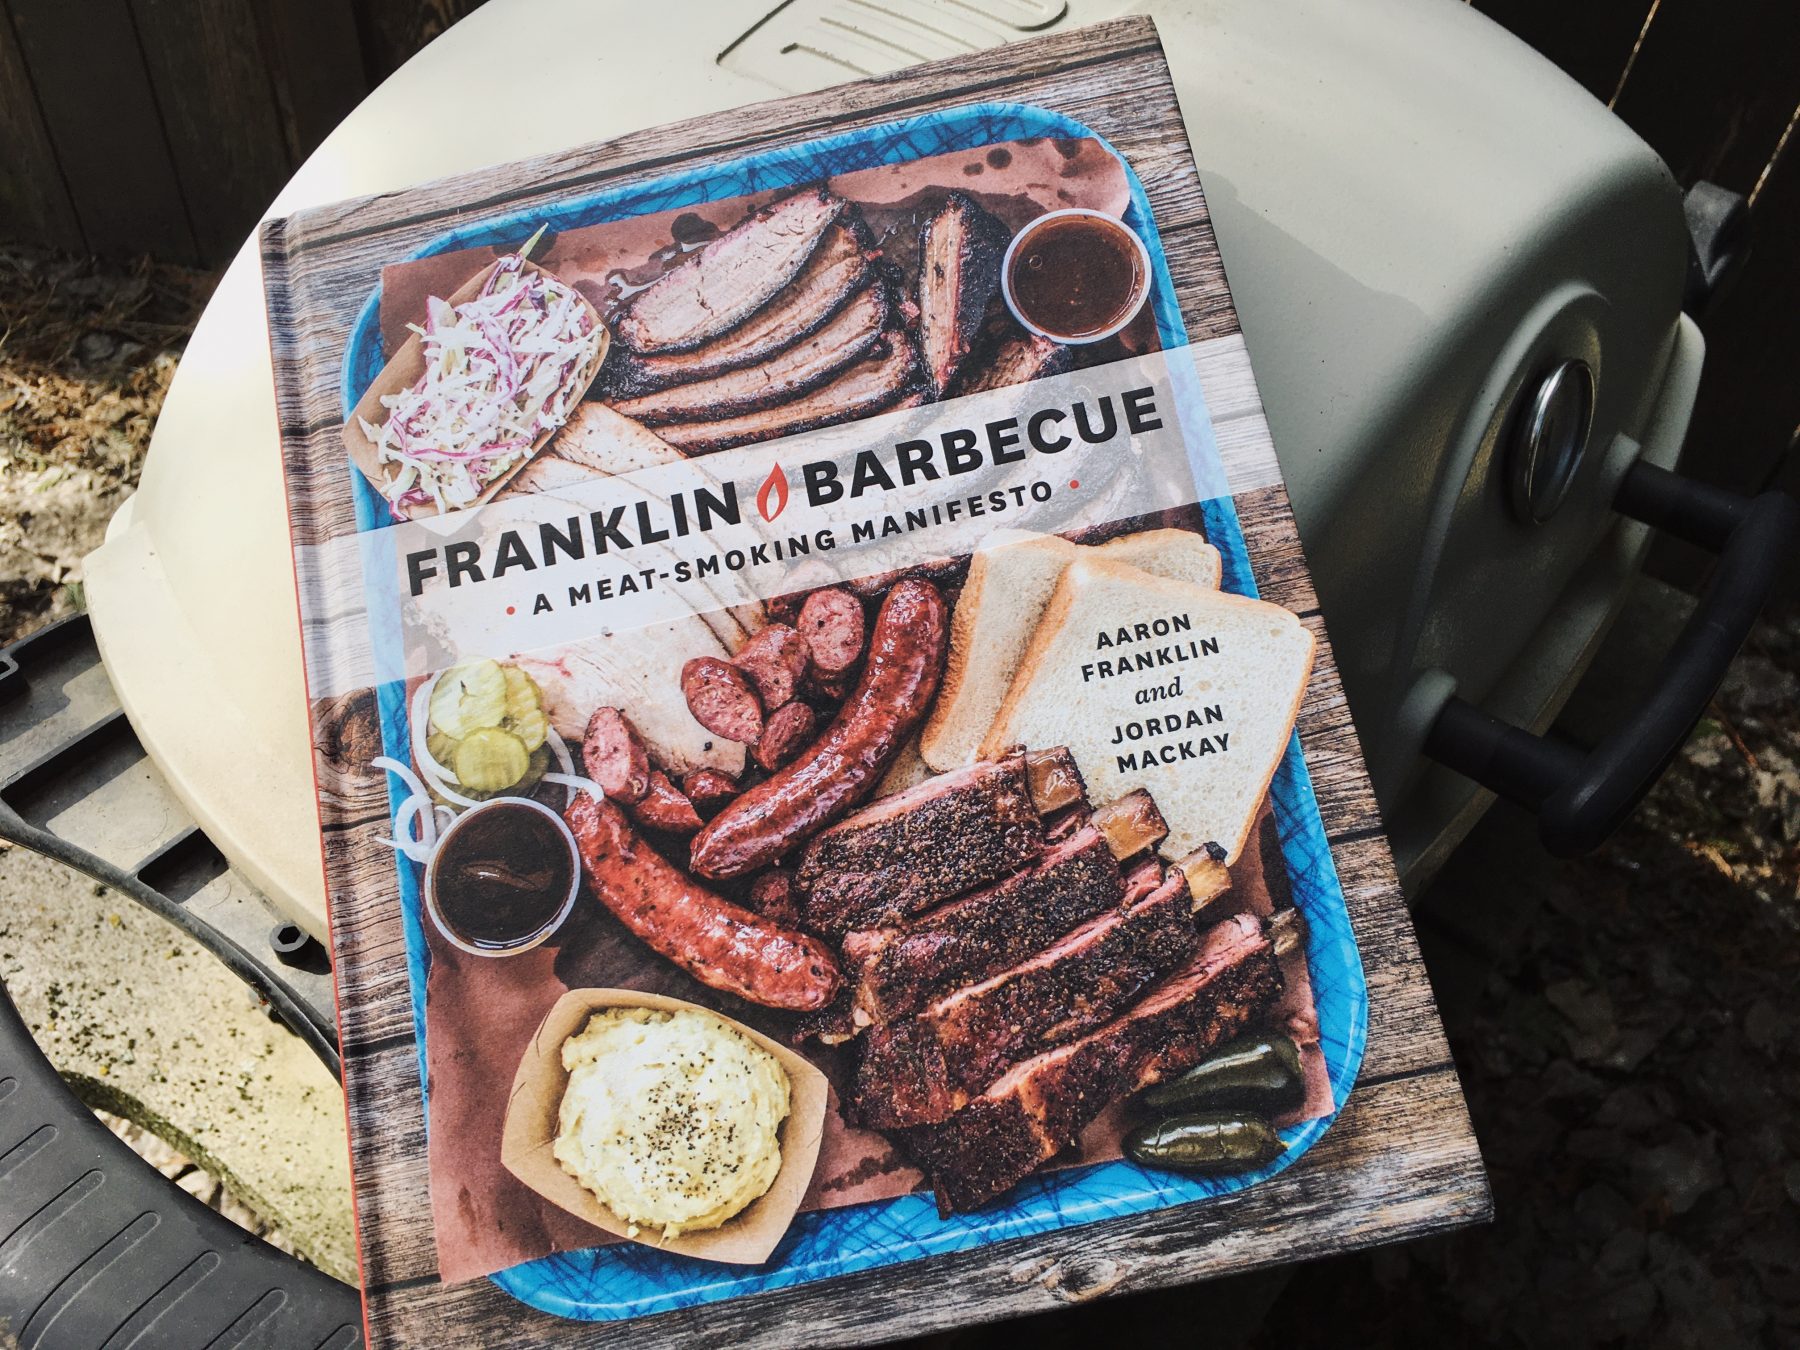 "Franklin Barbecue: A Meat-Smoking Manifesto." Photo by Mary Bird.